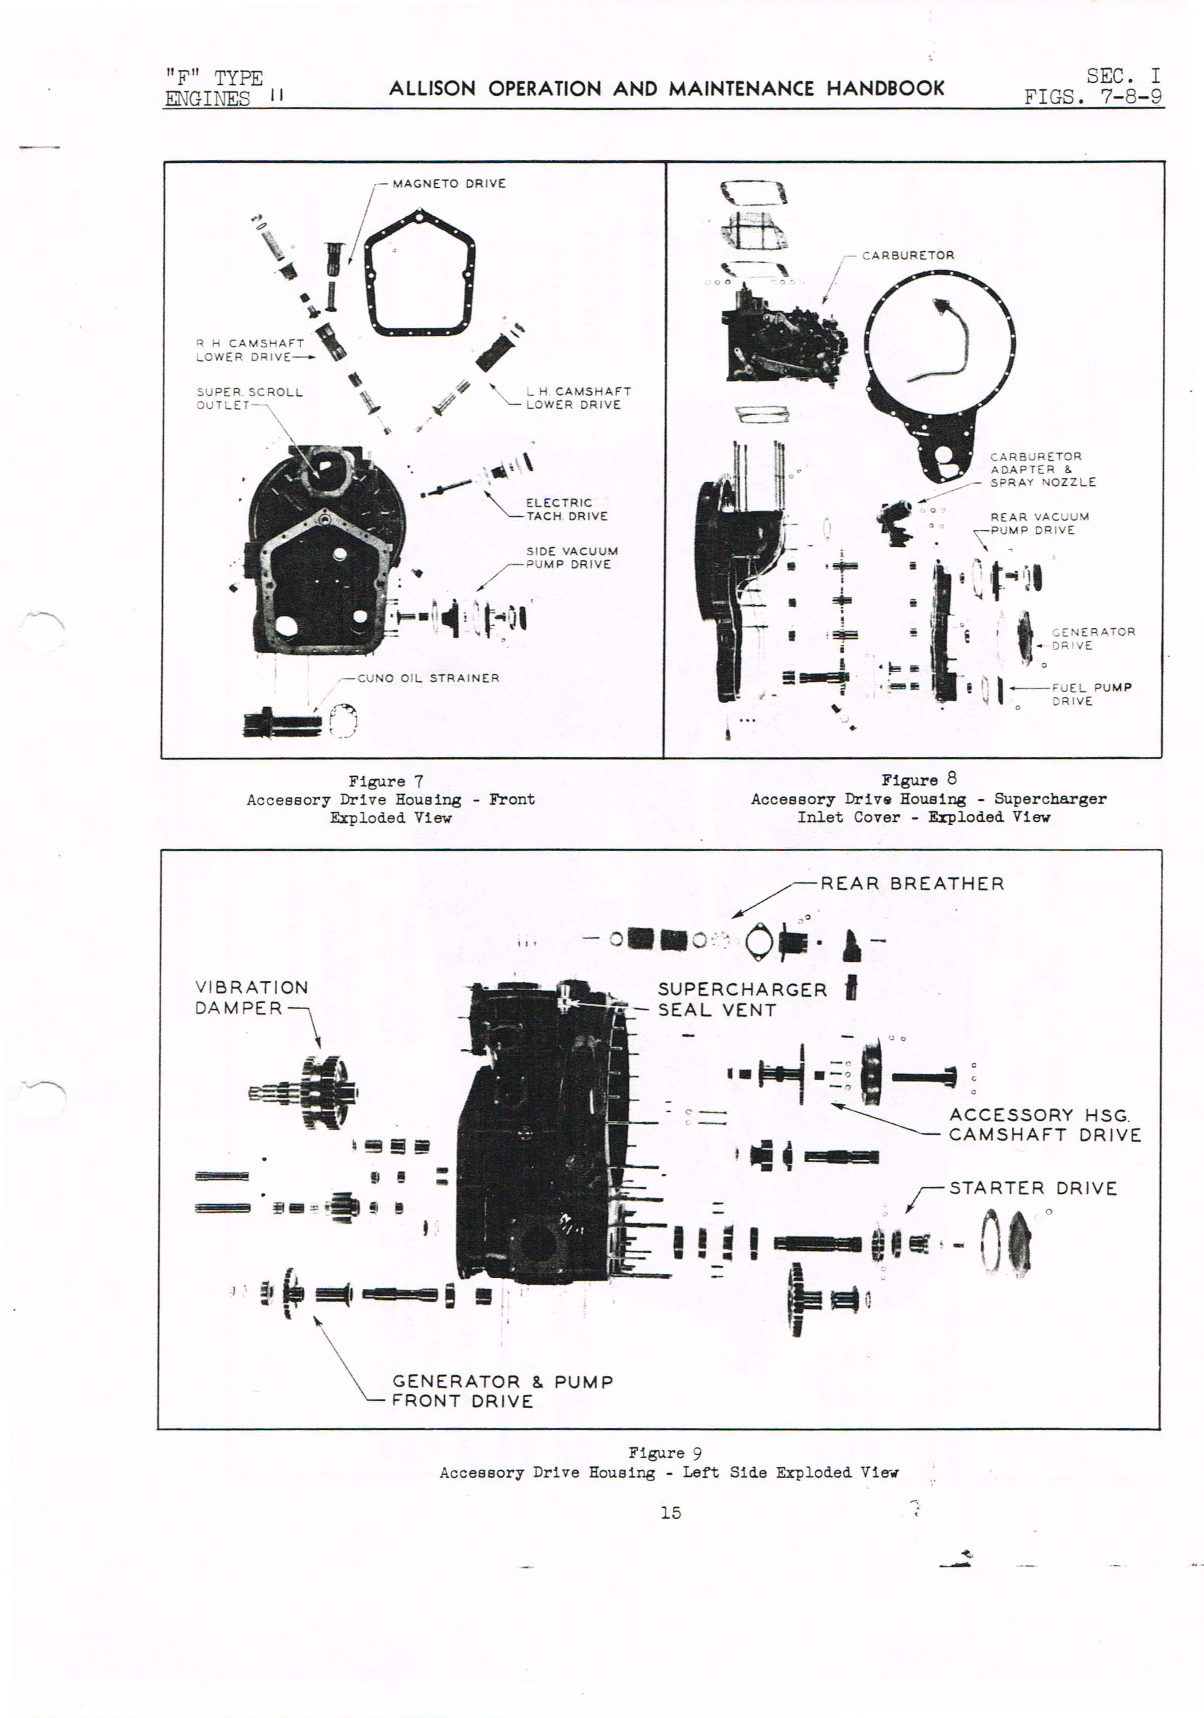 Sample page 5 from AirCorps Library document: Operation, Maintenance and Overhaul for Allison V-1710-F Engines